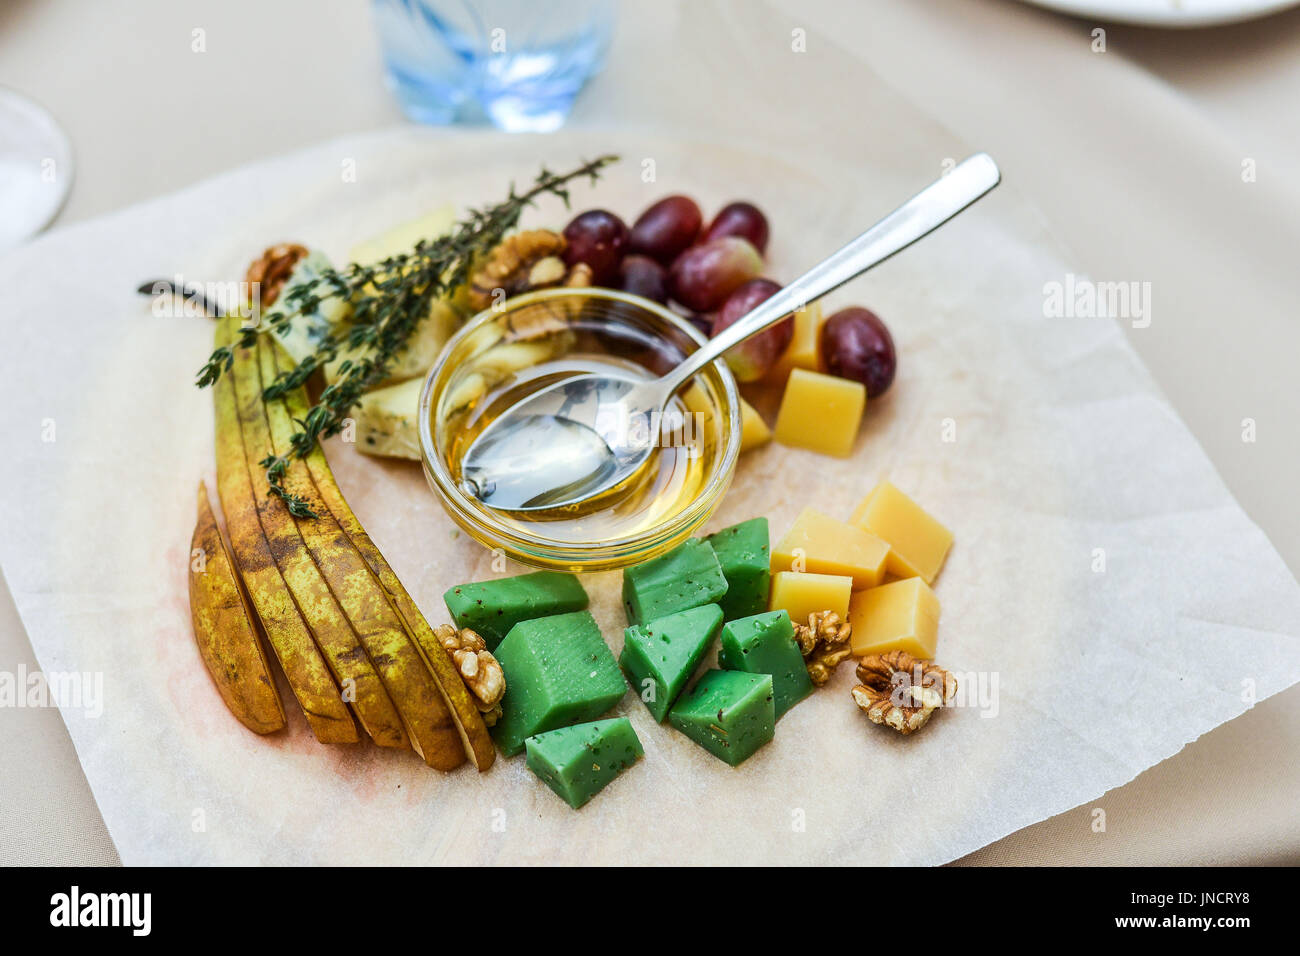 Cheese plate with cheeses Dorblu Stock Photo